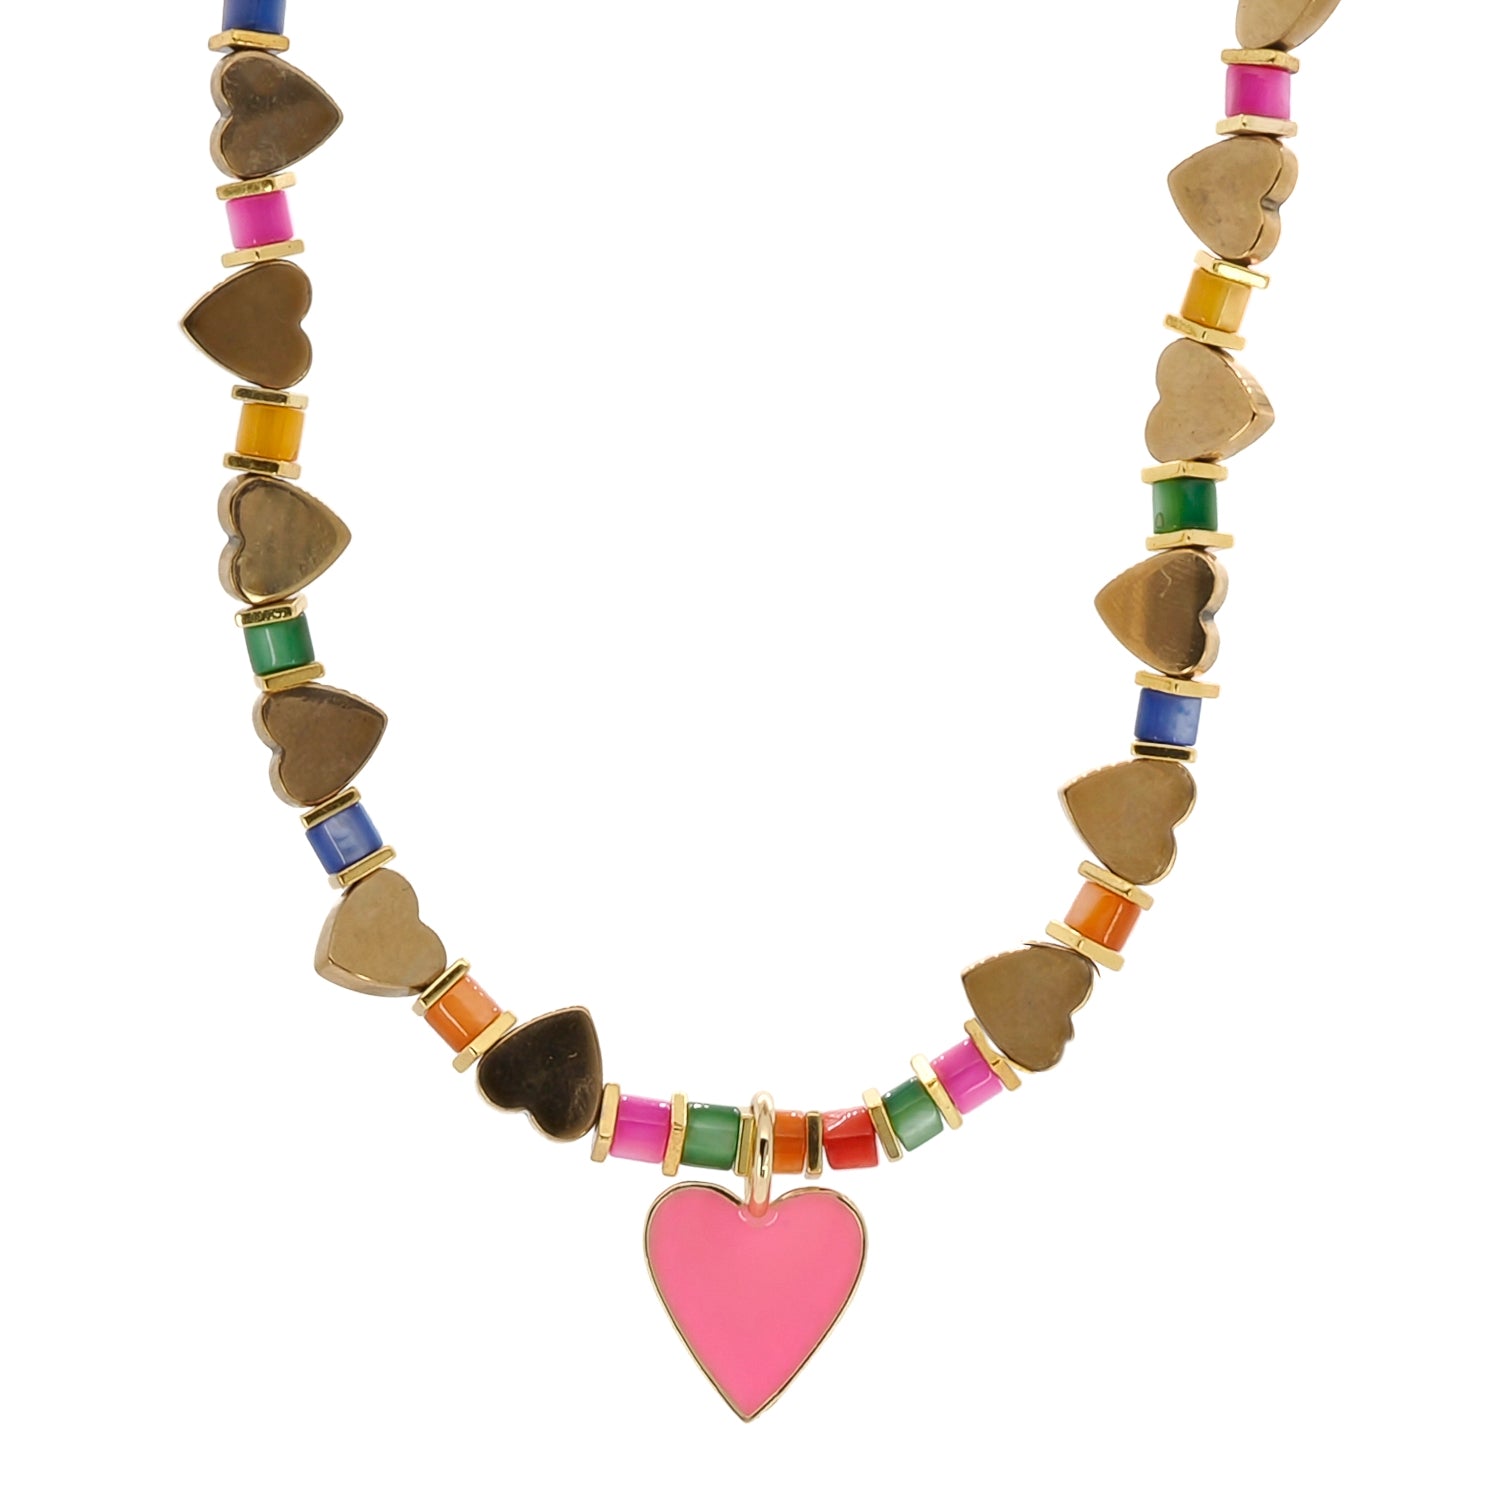 Handmade Necklace with Pink Heart Pendant and Gold Hematite Beads